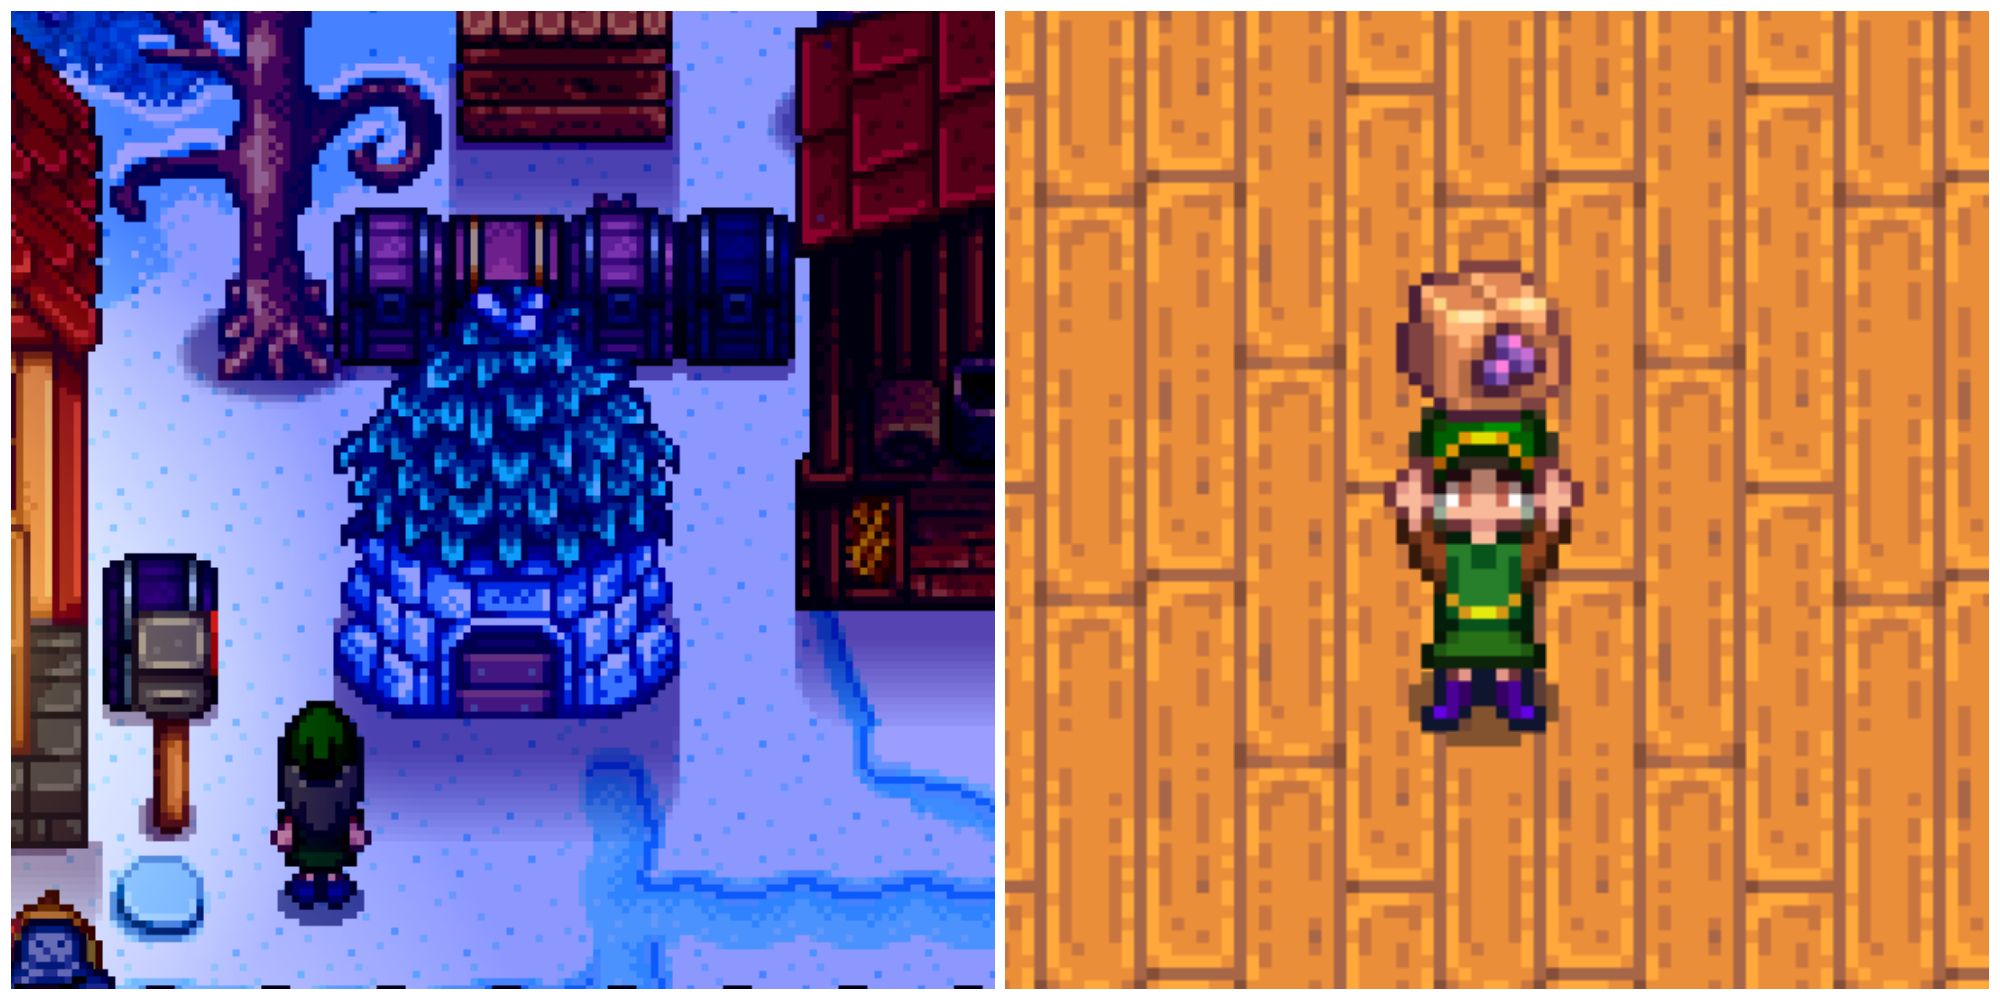 Split image of a Junimo Hut and a character holding raisins in Stardew Valley